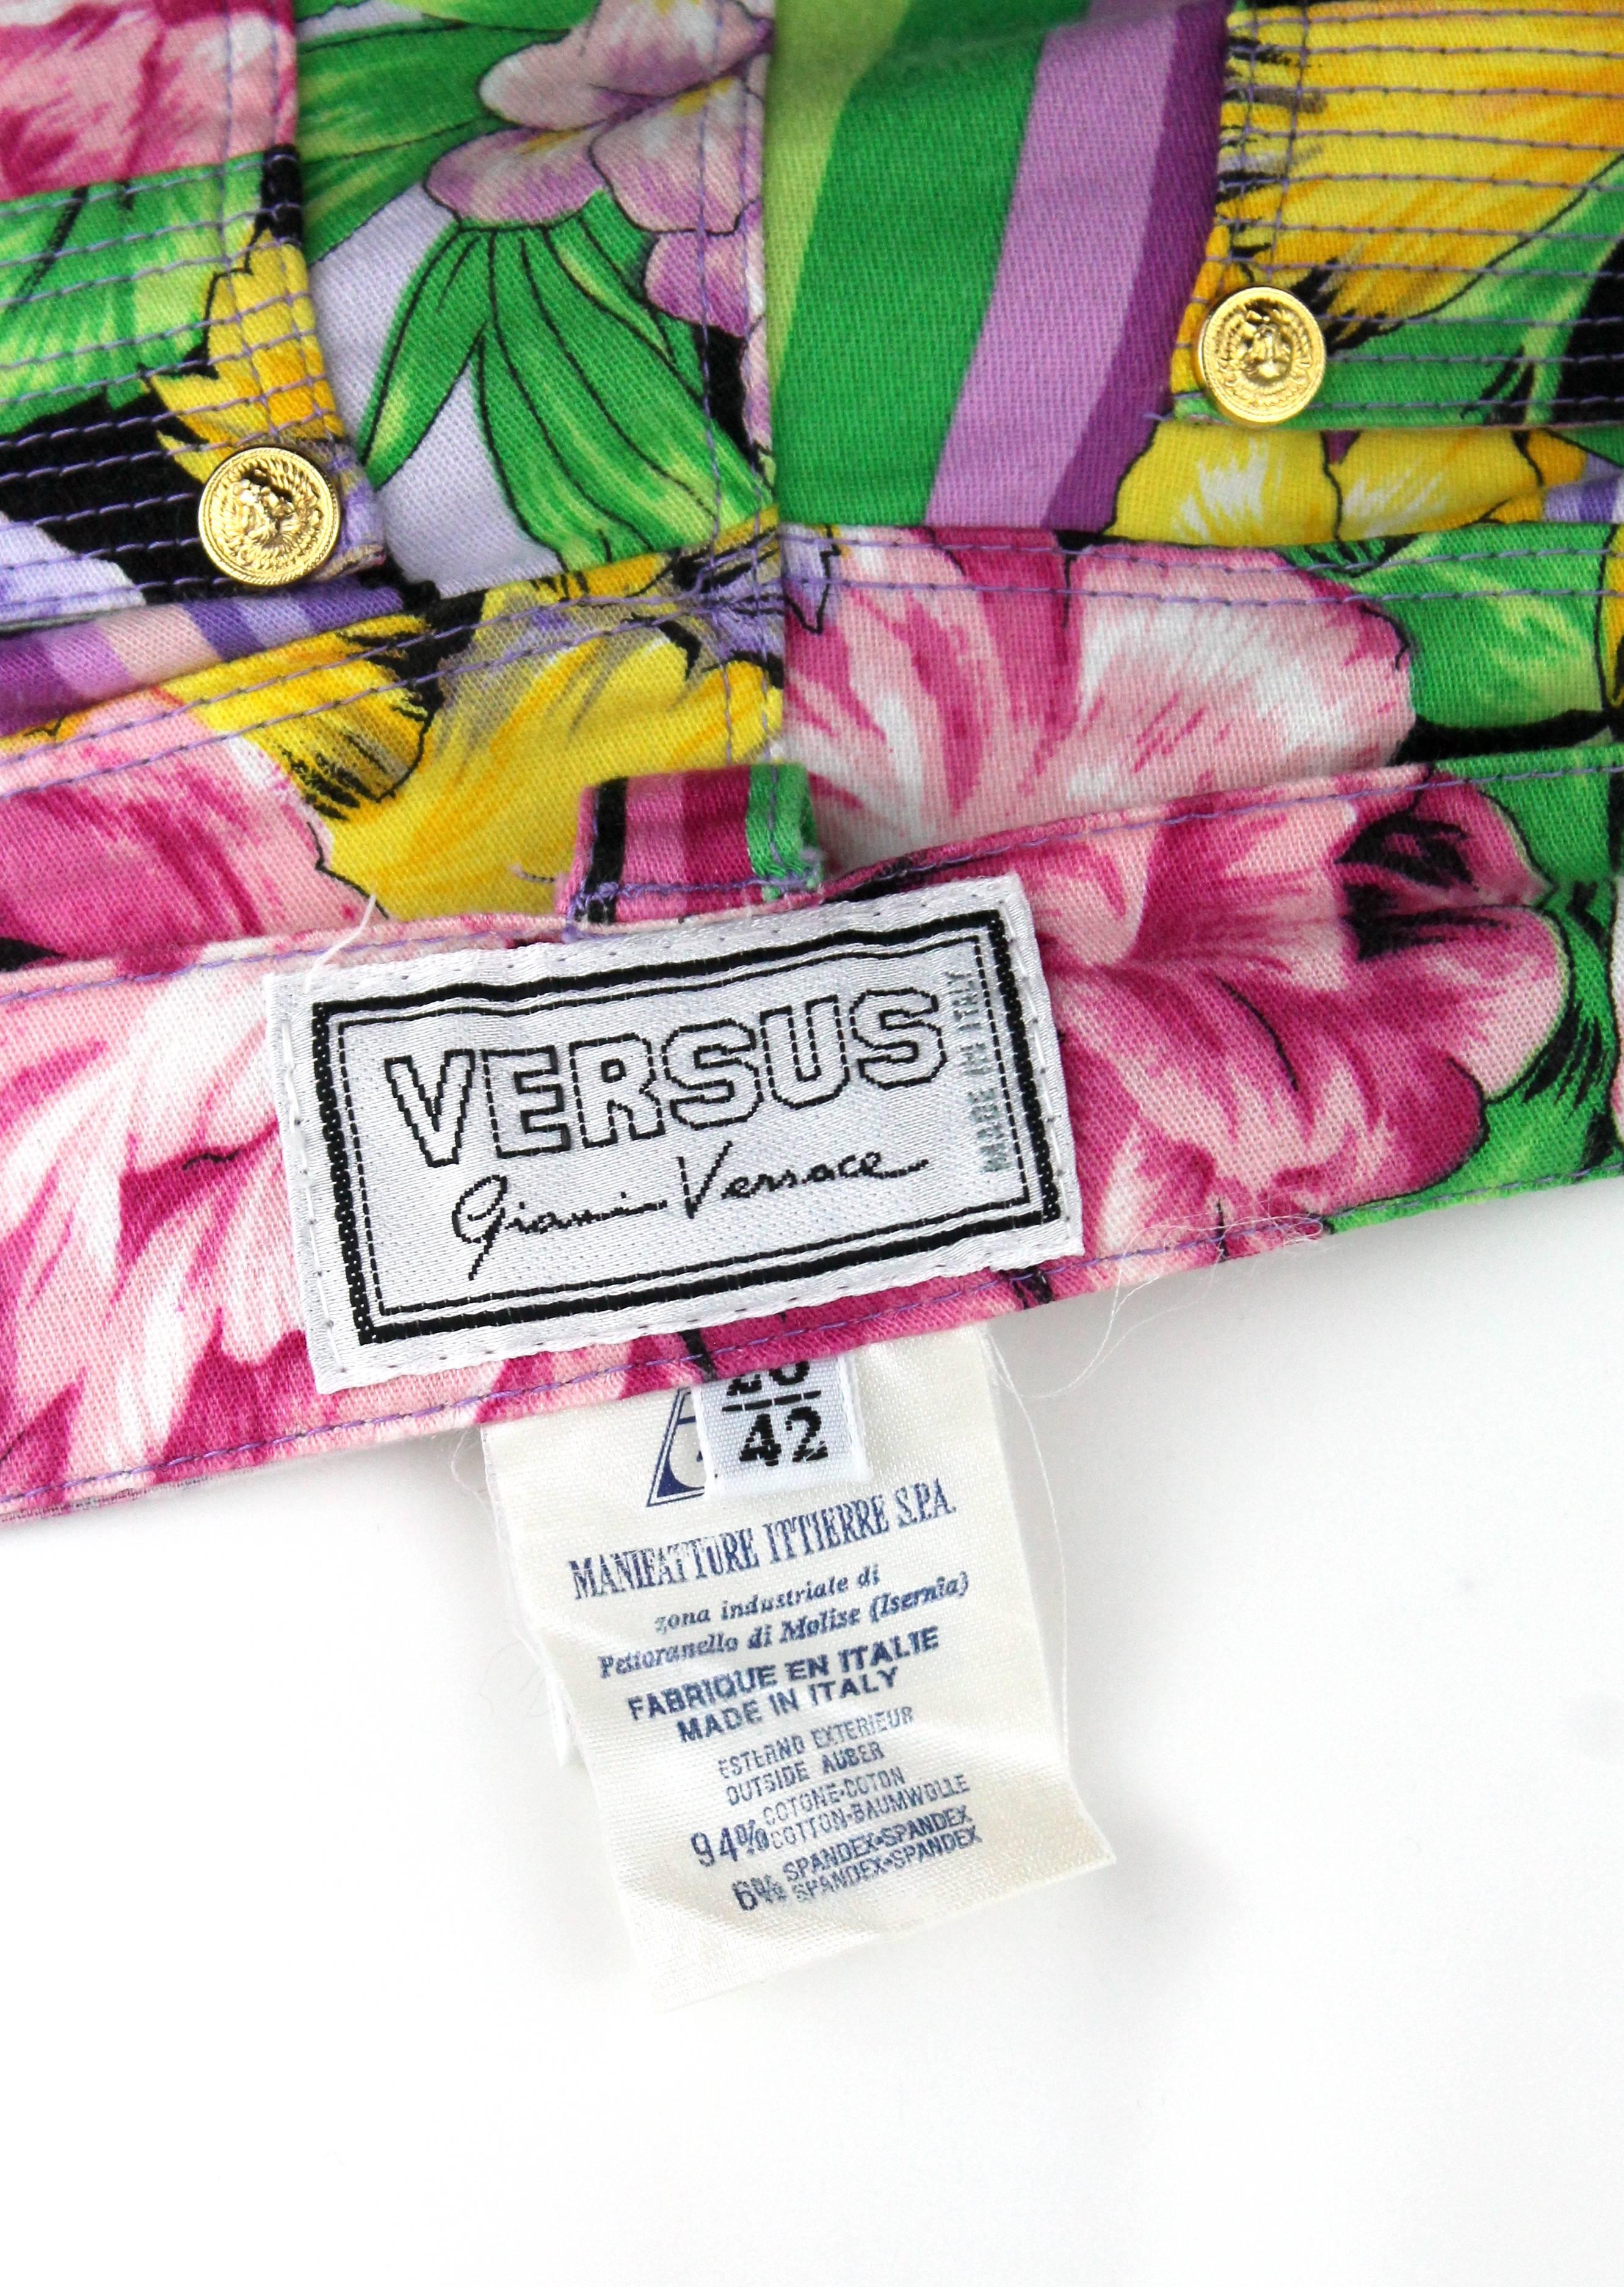 Gianni Versace Versus Floral Cotton Jeans with Ankle Zip, c. 90's, Size 24/25 W  2